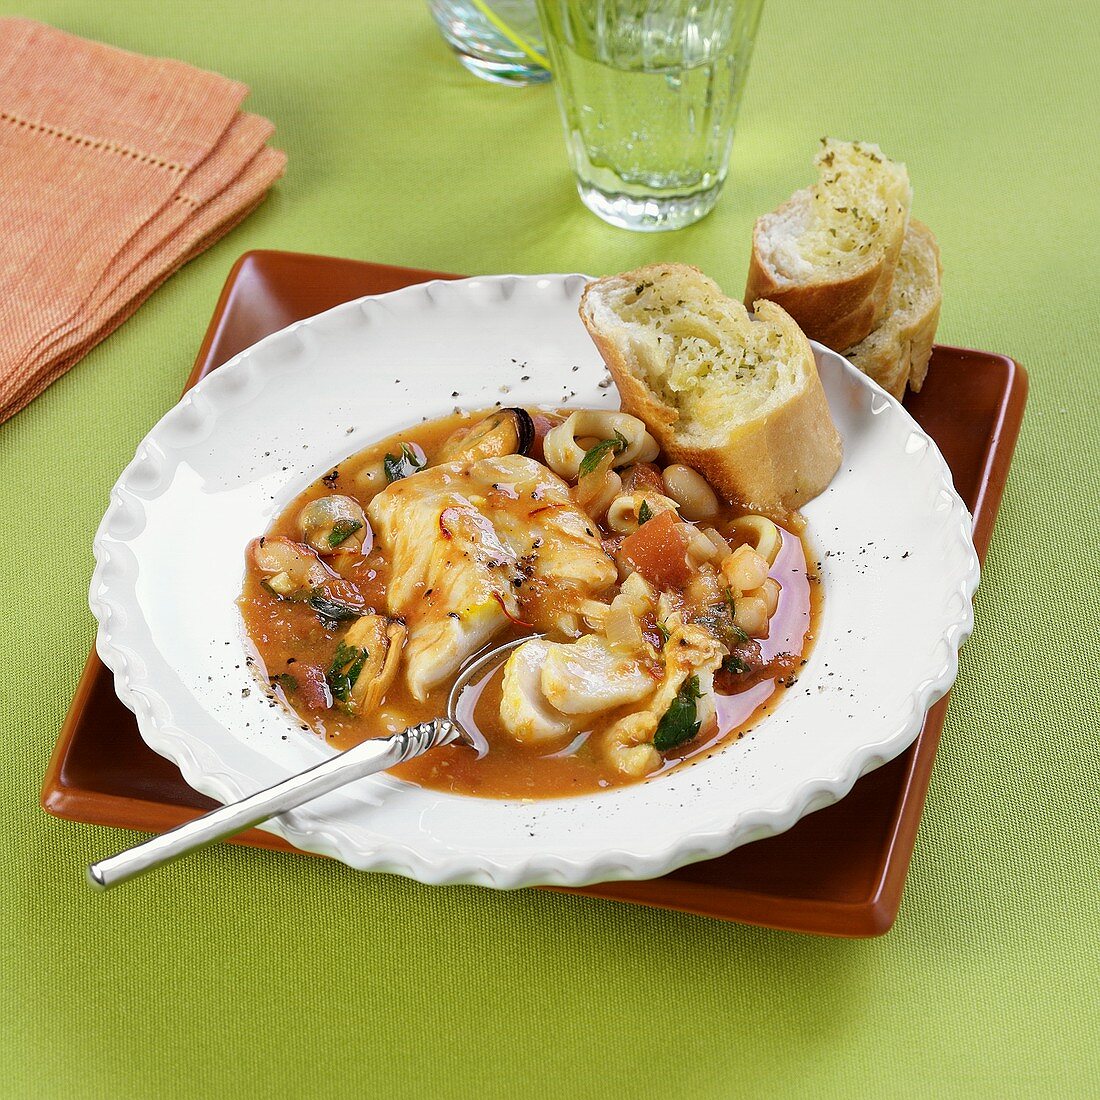 Spicy seafood stew